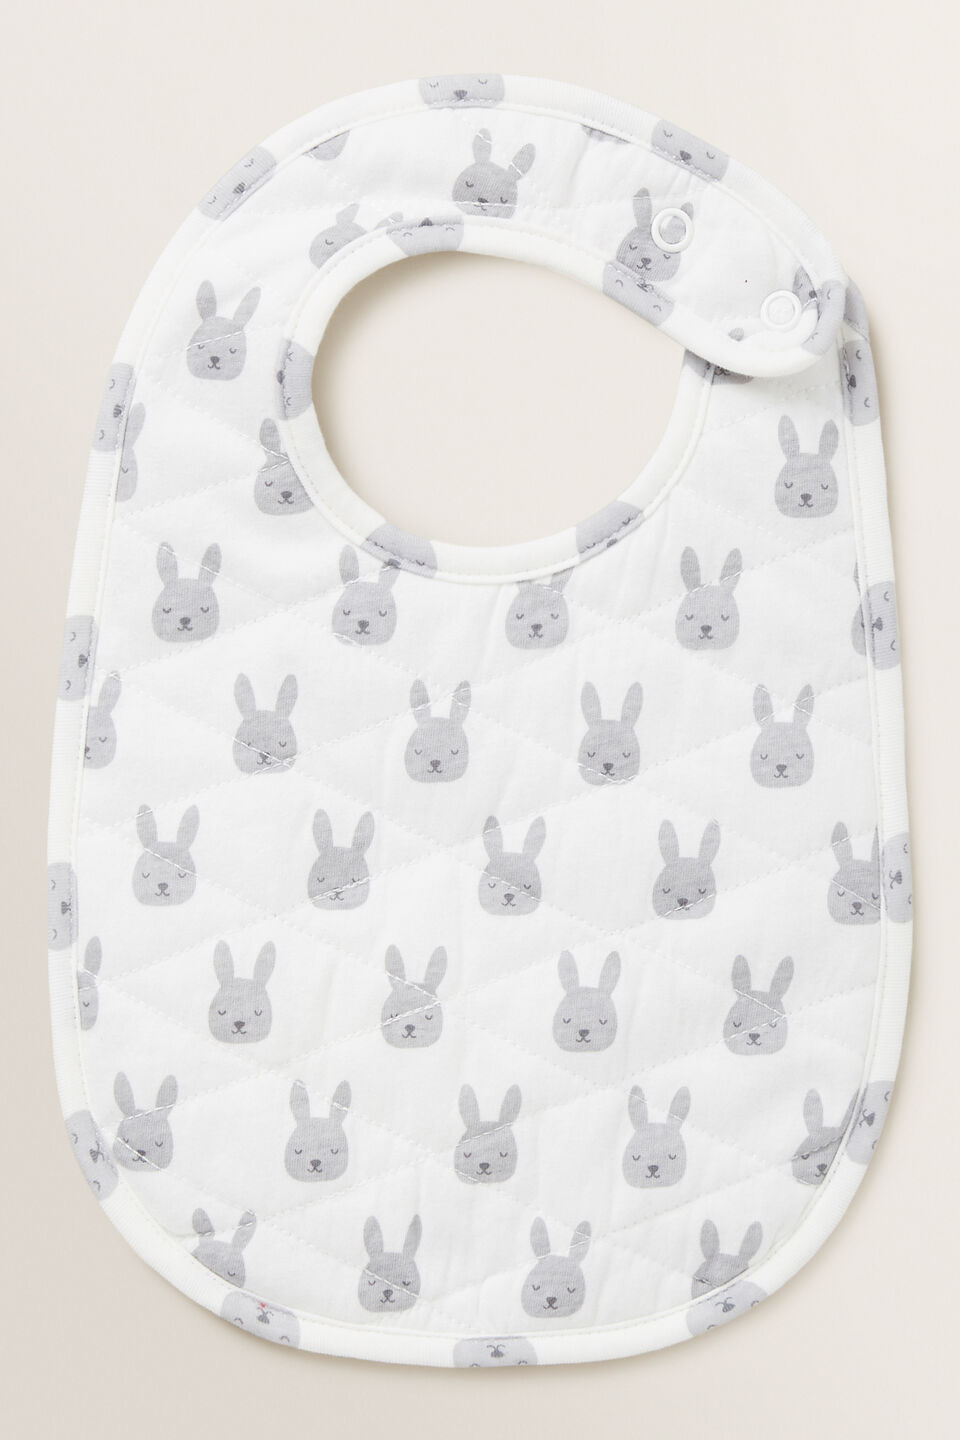 Bunny Quilted Bib  